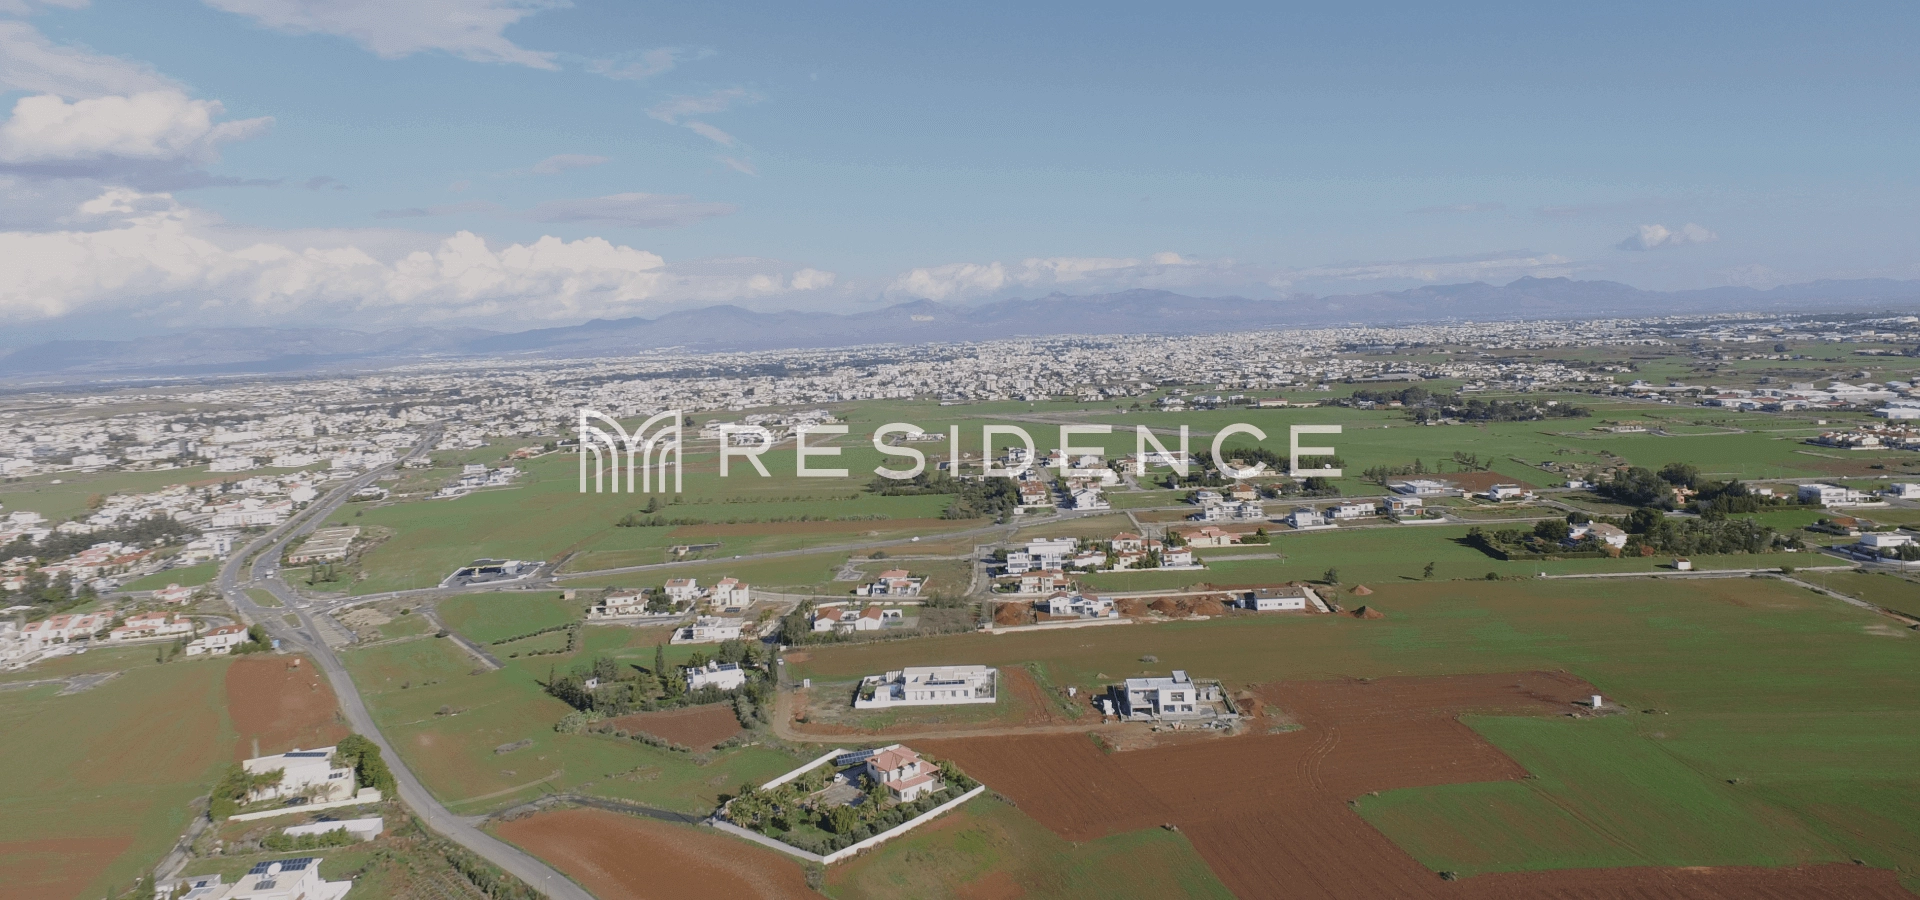 6,123m² Residential Plot for Sale in Strovolos, Nicosia District